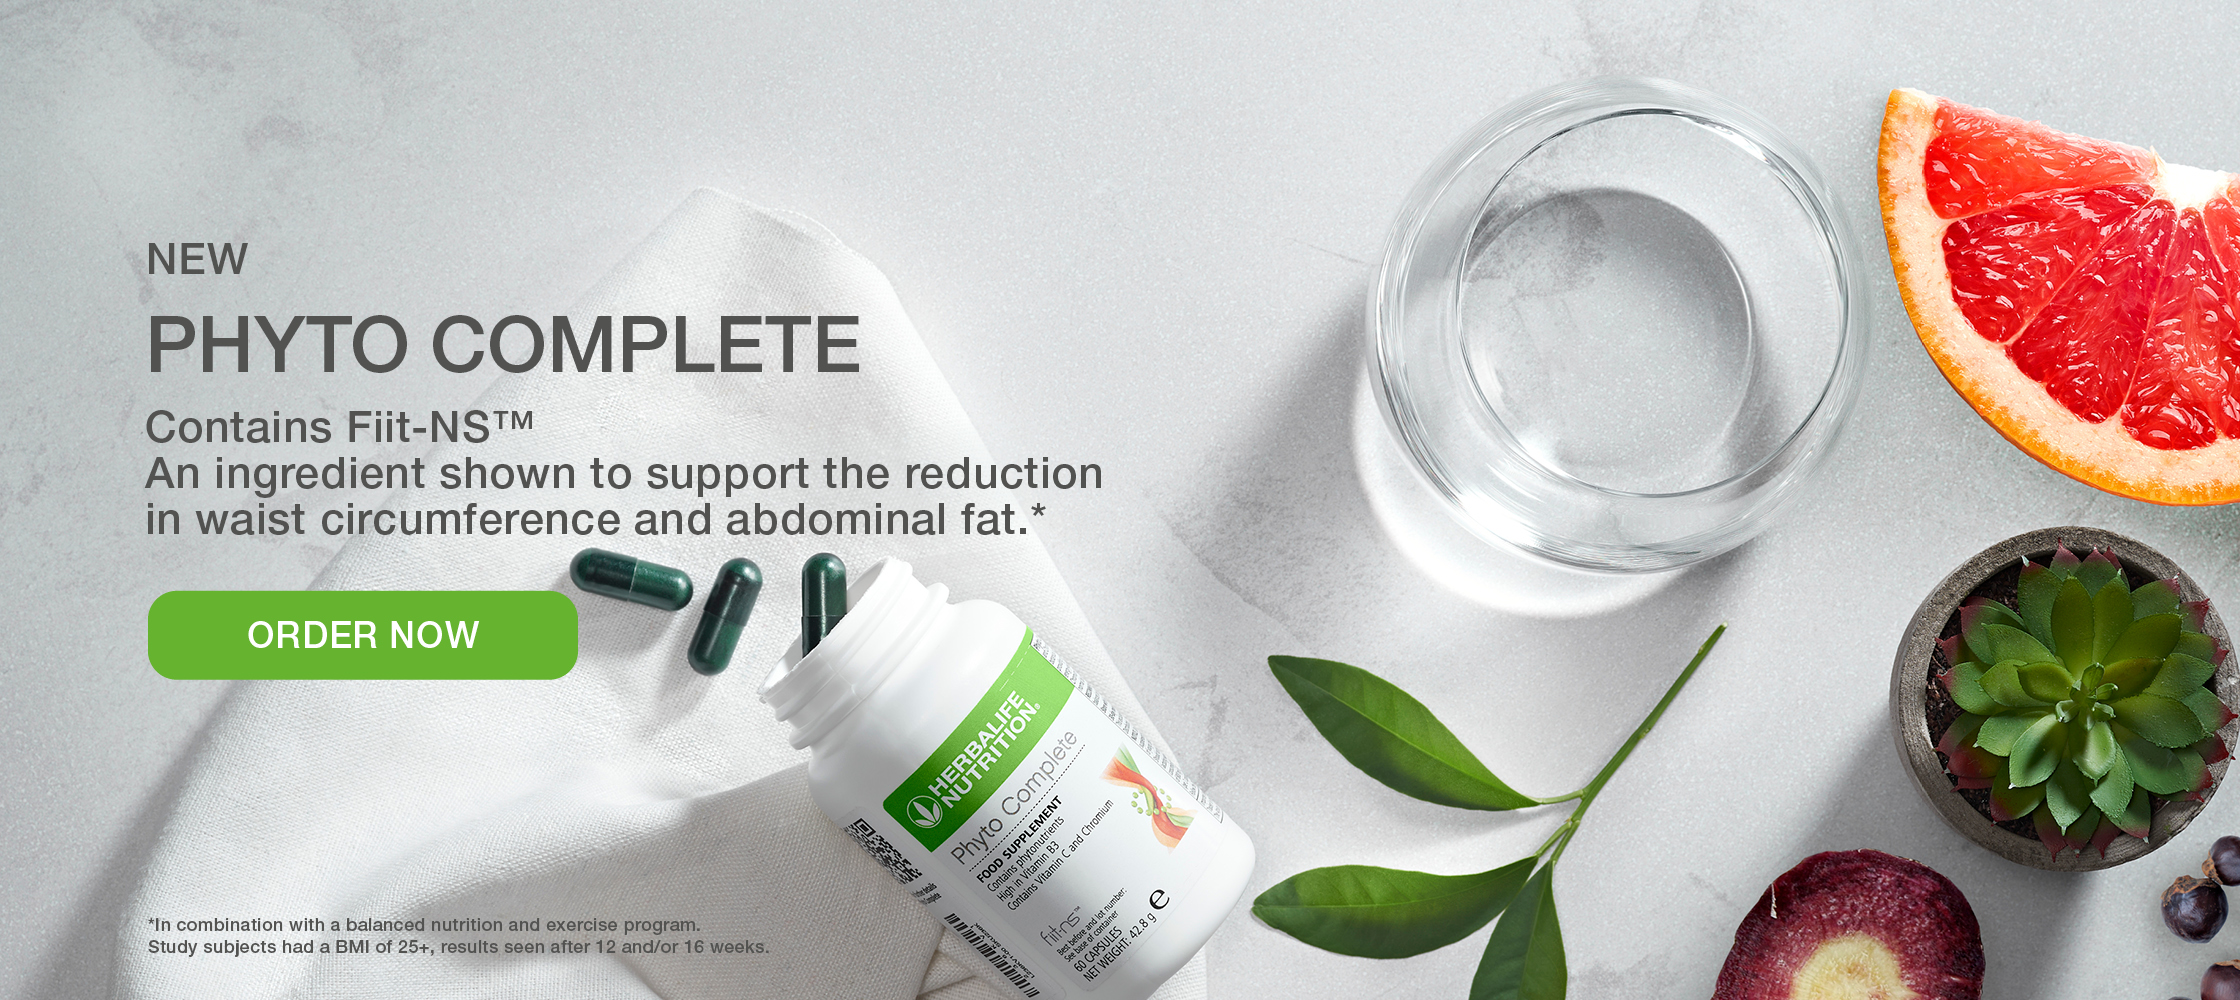 Phyto Complete Supplement capsules